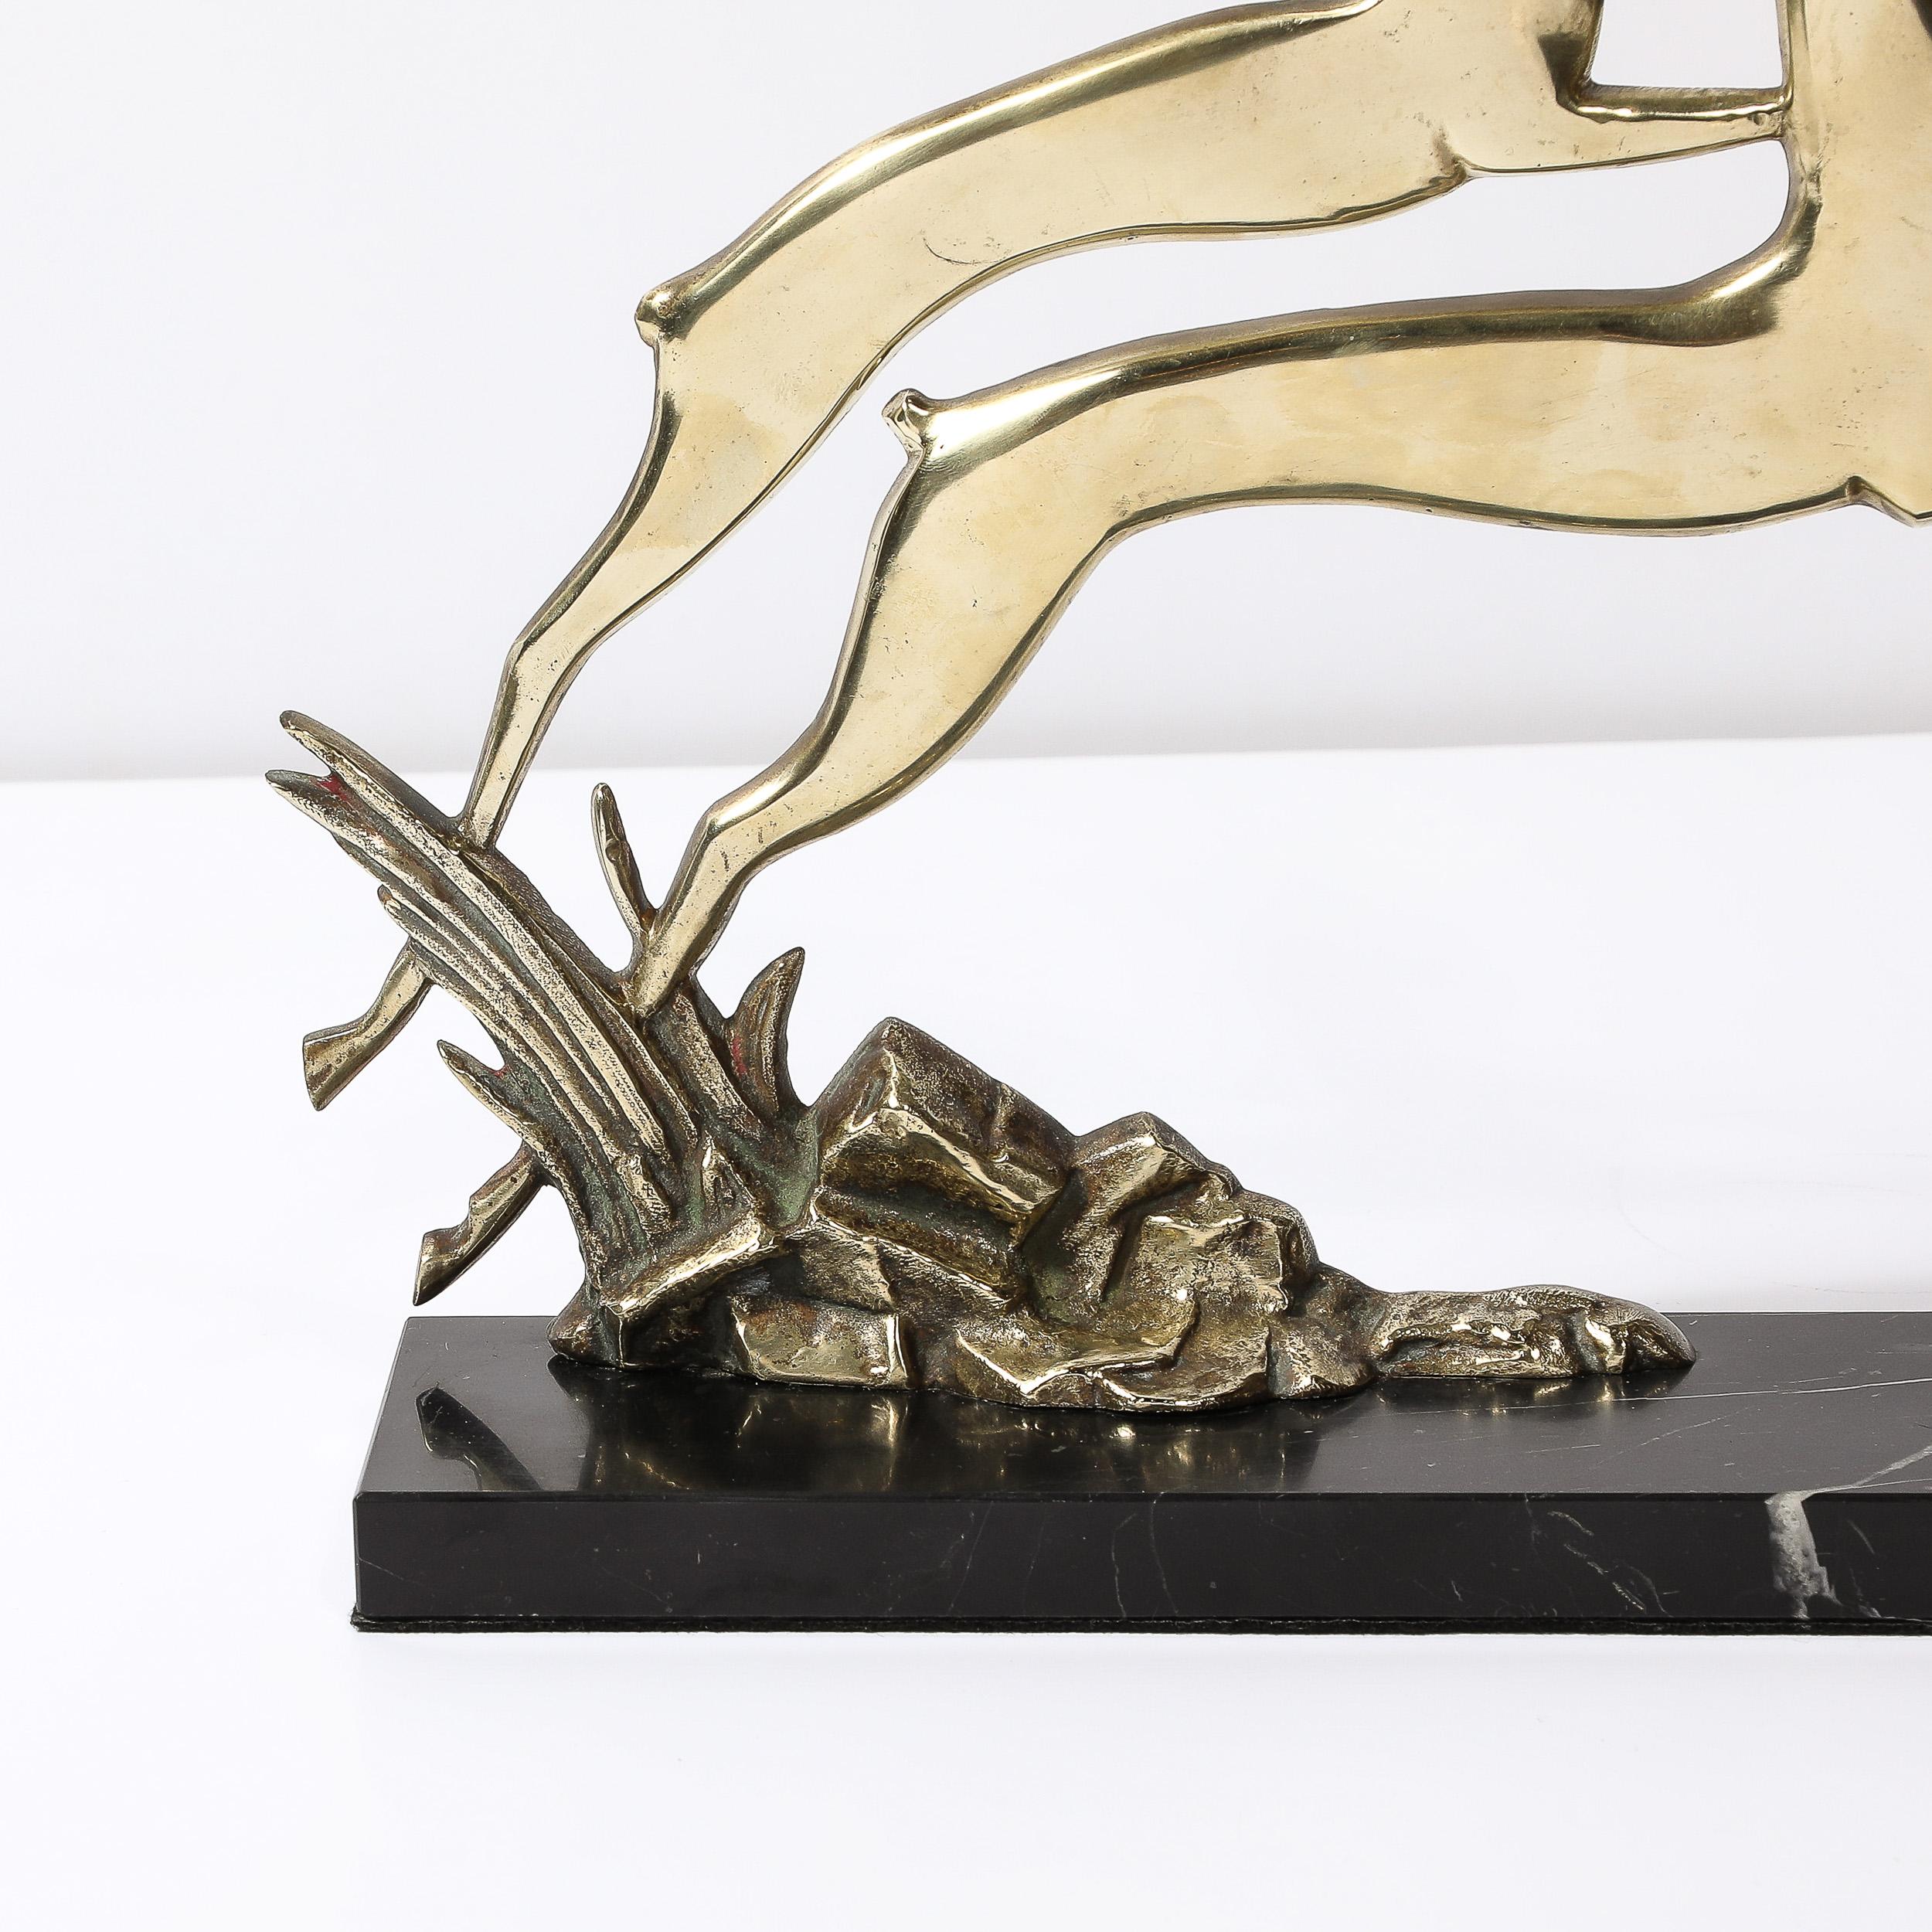 French Art Deco Leaping Gazelle Sculpture in Polished Brass on Black Marble Base For Sale